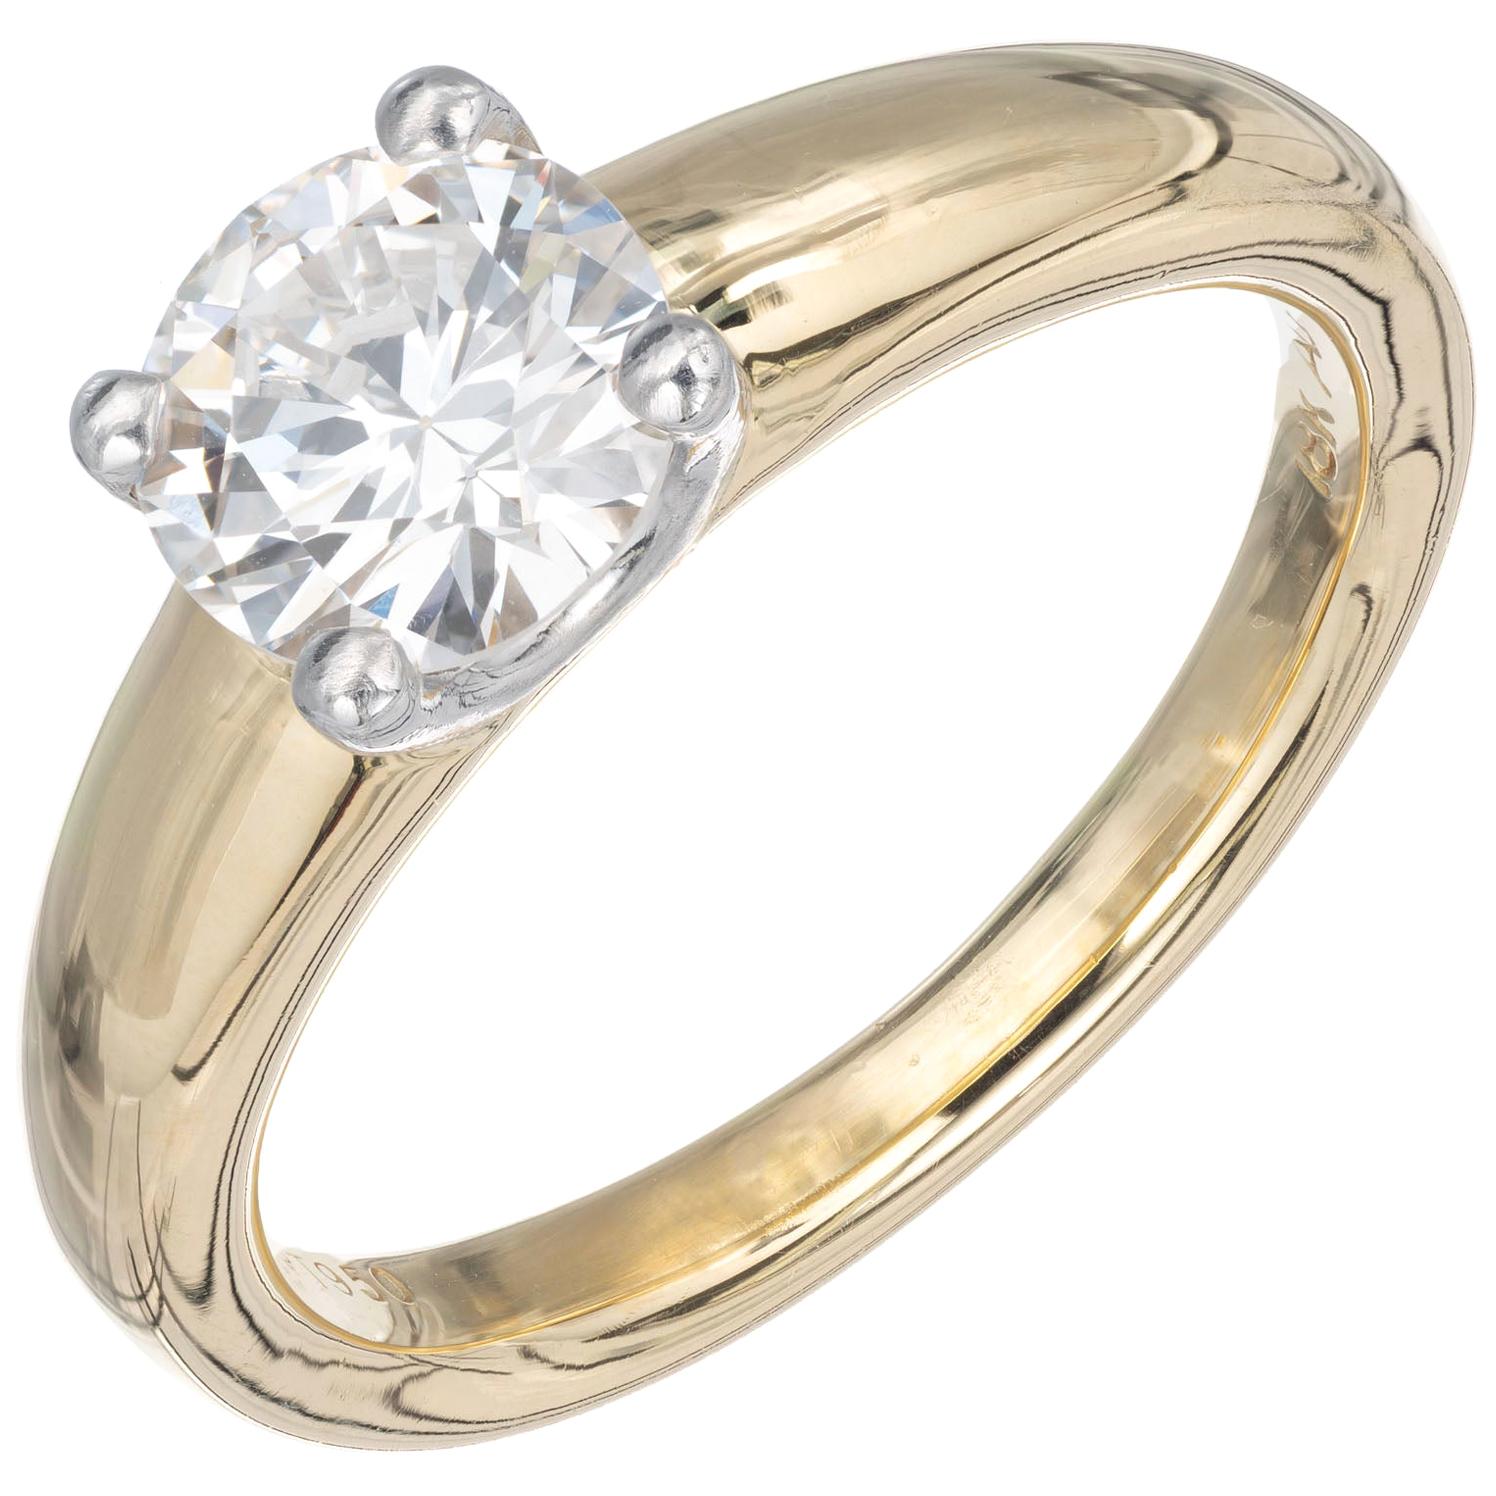 Alfred Butler EGL Certified 1.15 Carat Diamond Gold Solitaire Engagement Ring